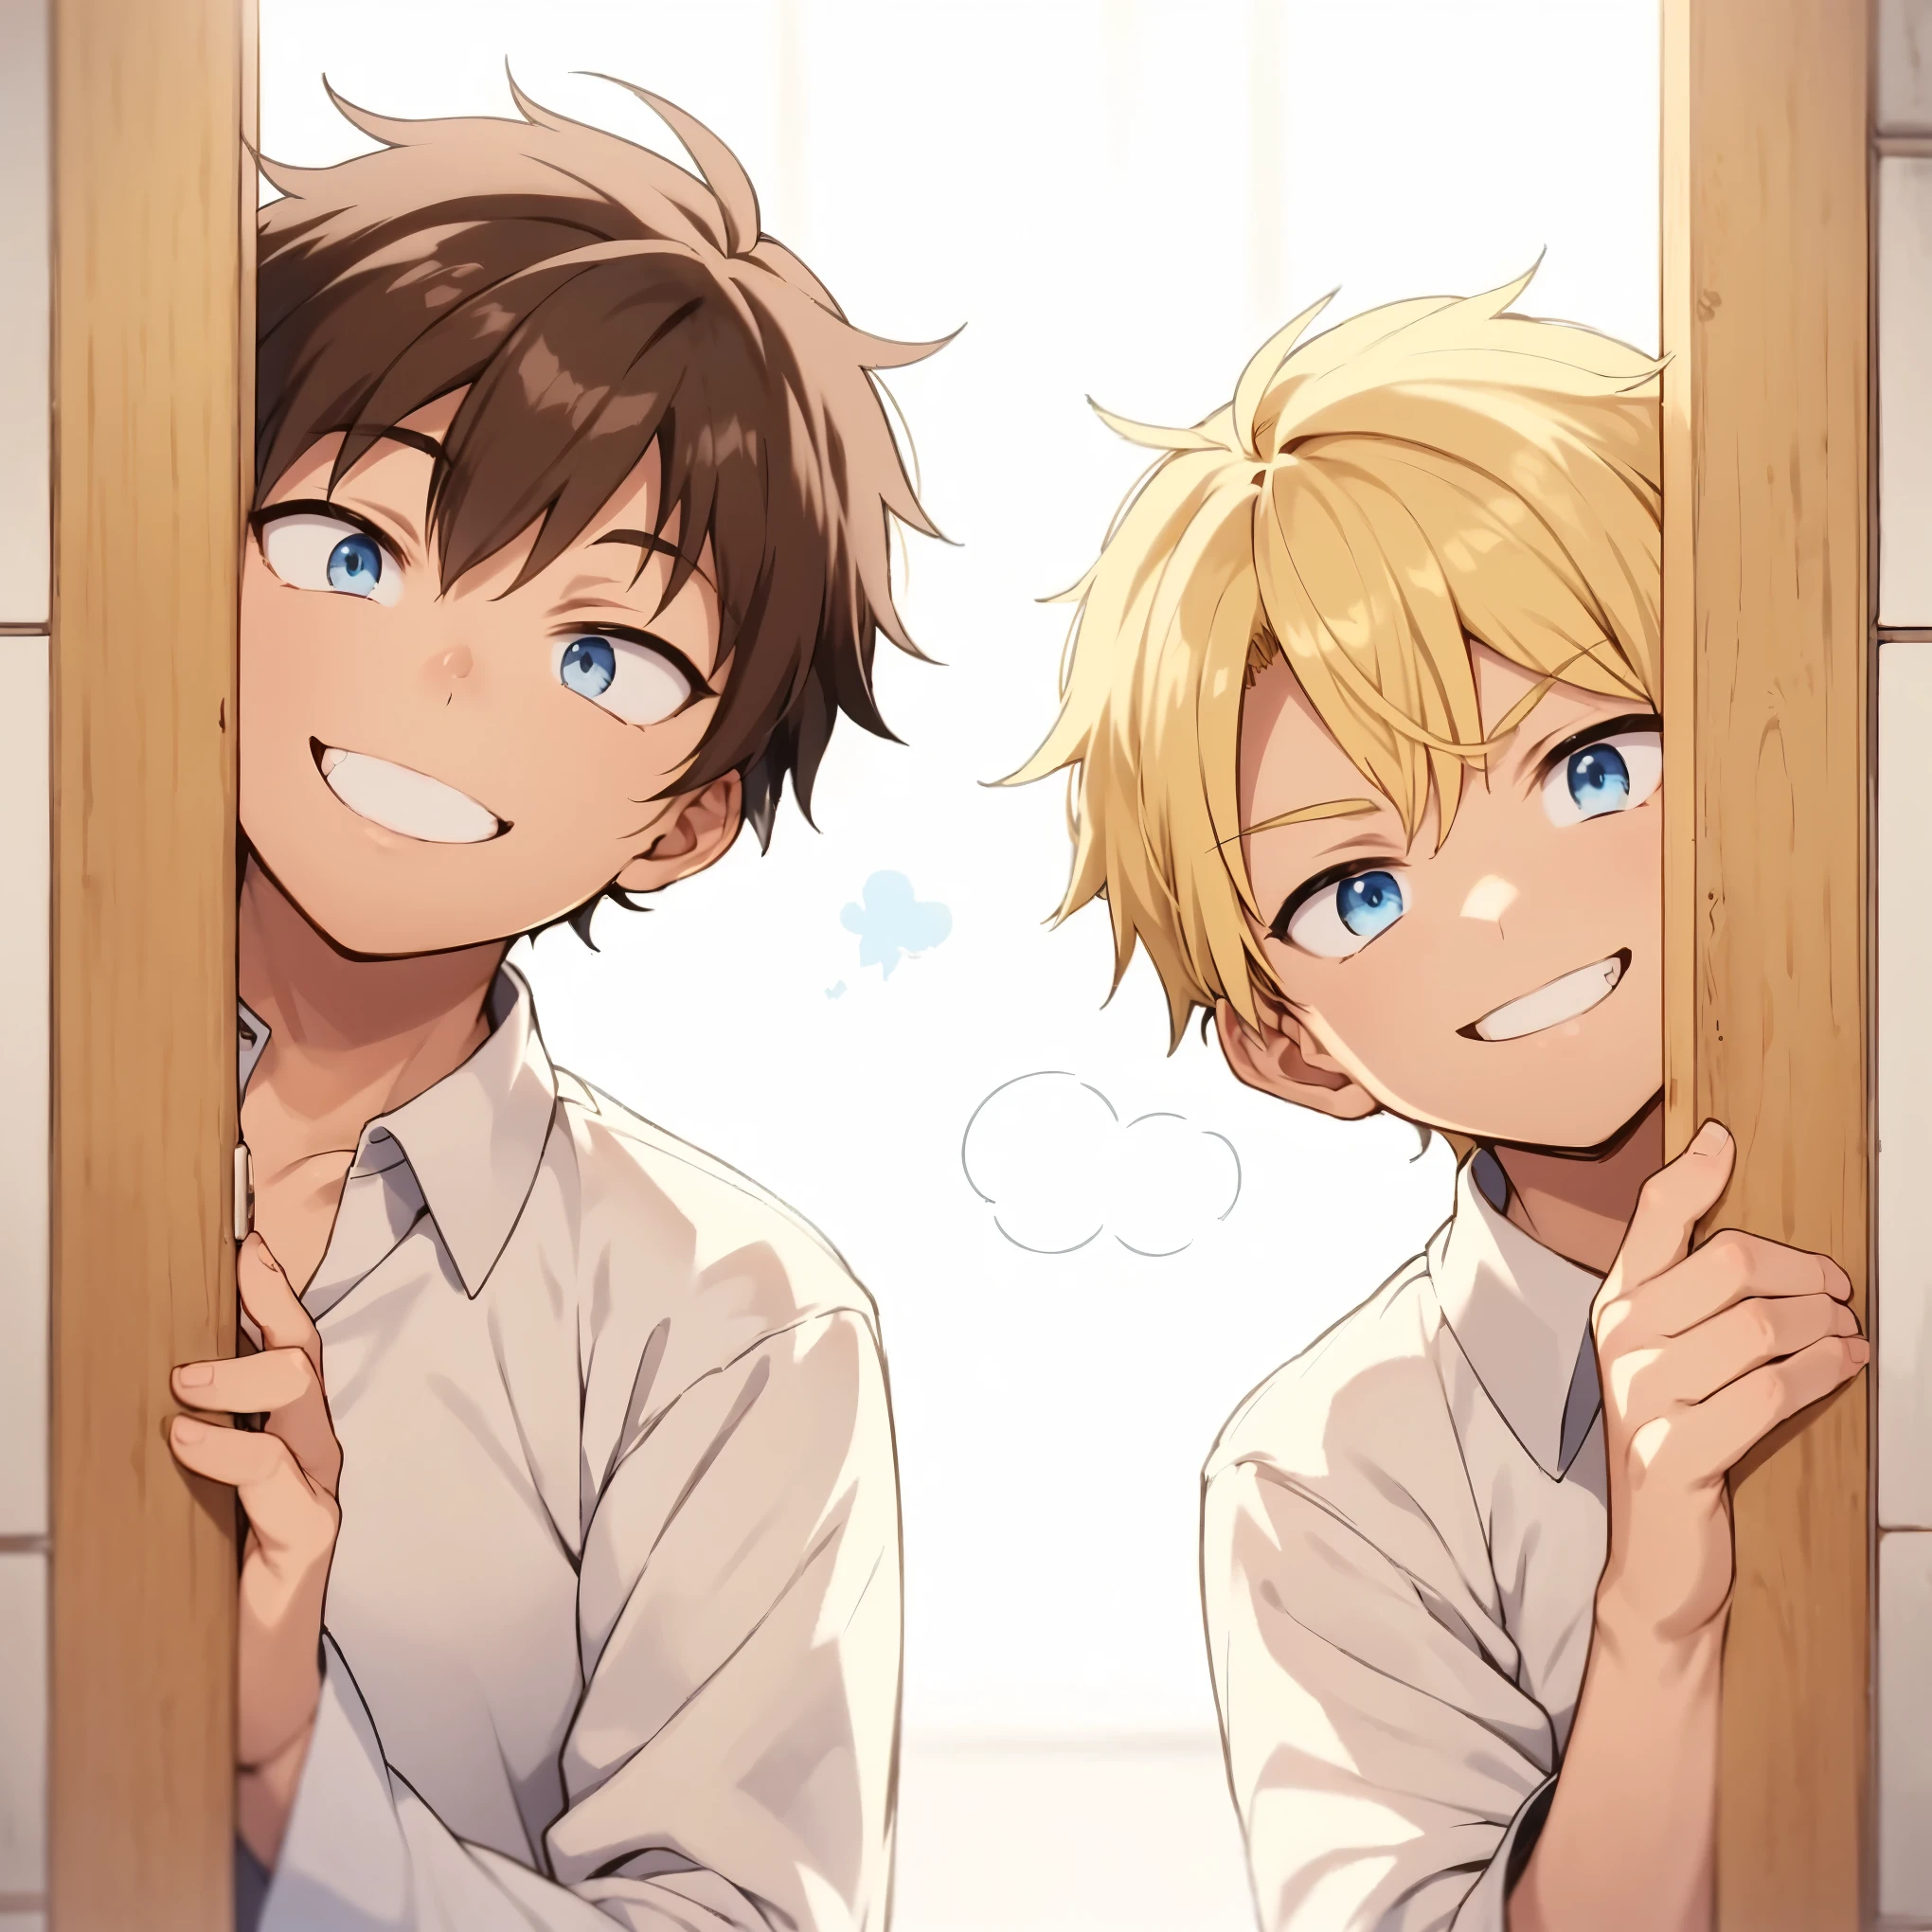 2 boy,grinning,An anime-style image showing two boys eavesdropping with their ears pressed against a door. Both boys are leaning in and listening intently. One boy has blonde hair, and the other has brown hair. Both are wearing white collared shirts. The composition focuses on their upper bodies, capturing their curious expressions as they listen,(detailed eyes),detailed skin,masterpiece,best quality,Top Quality,High quality,